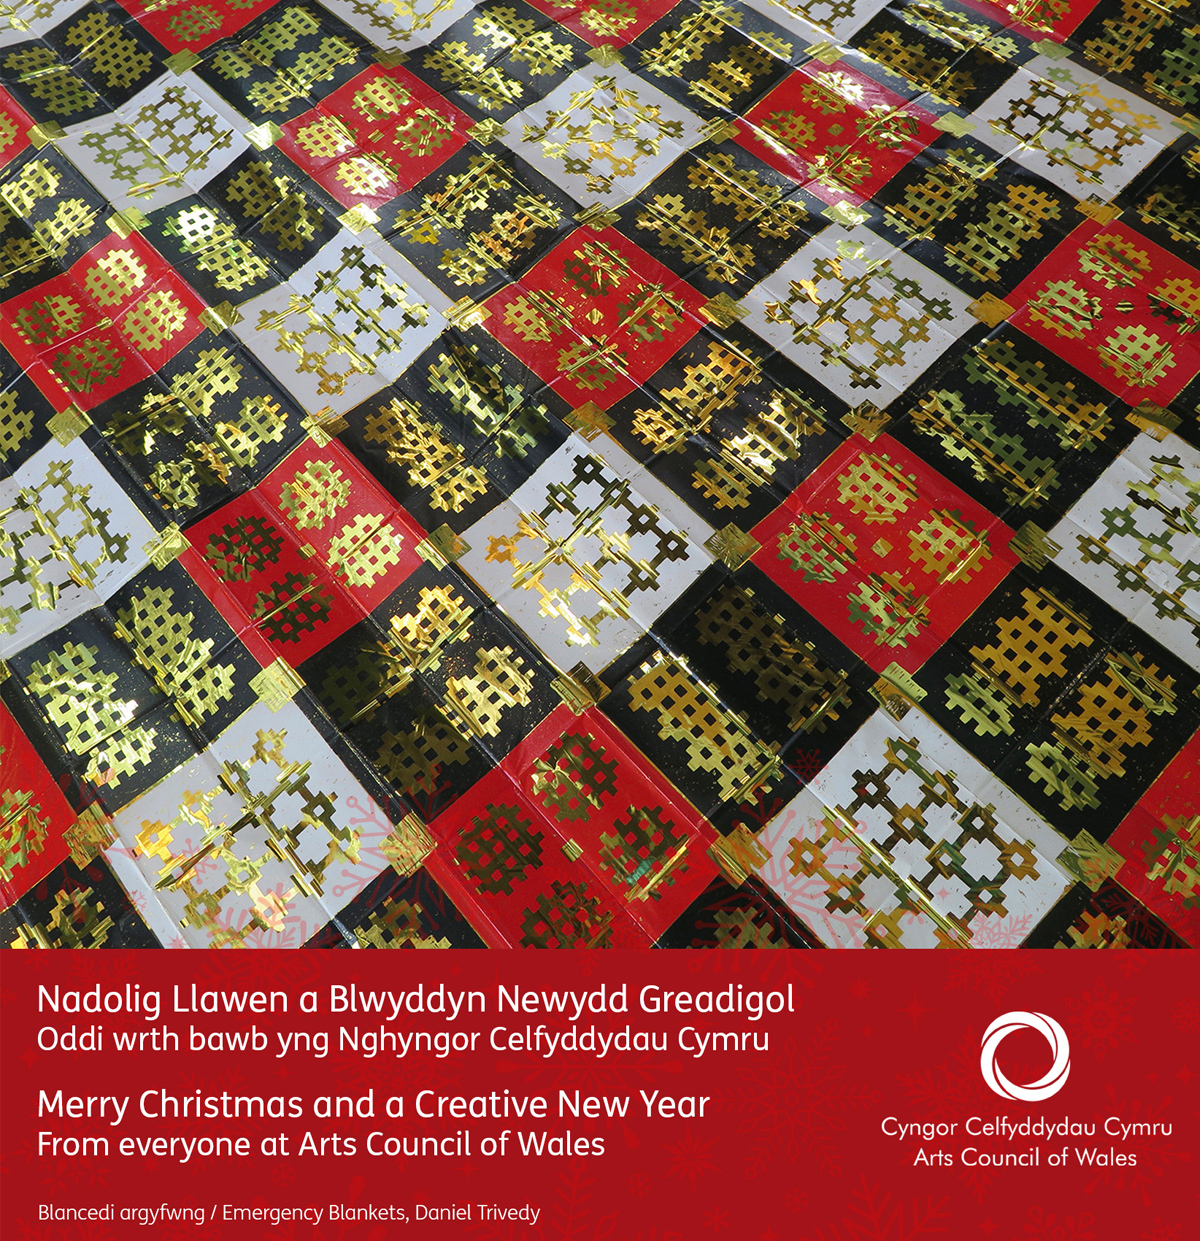 Merry Christmas banner from the Arts Council of Wales with image of Emergency Blankets by Daniel Trivedy